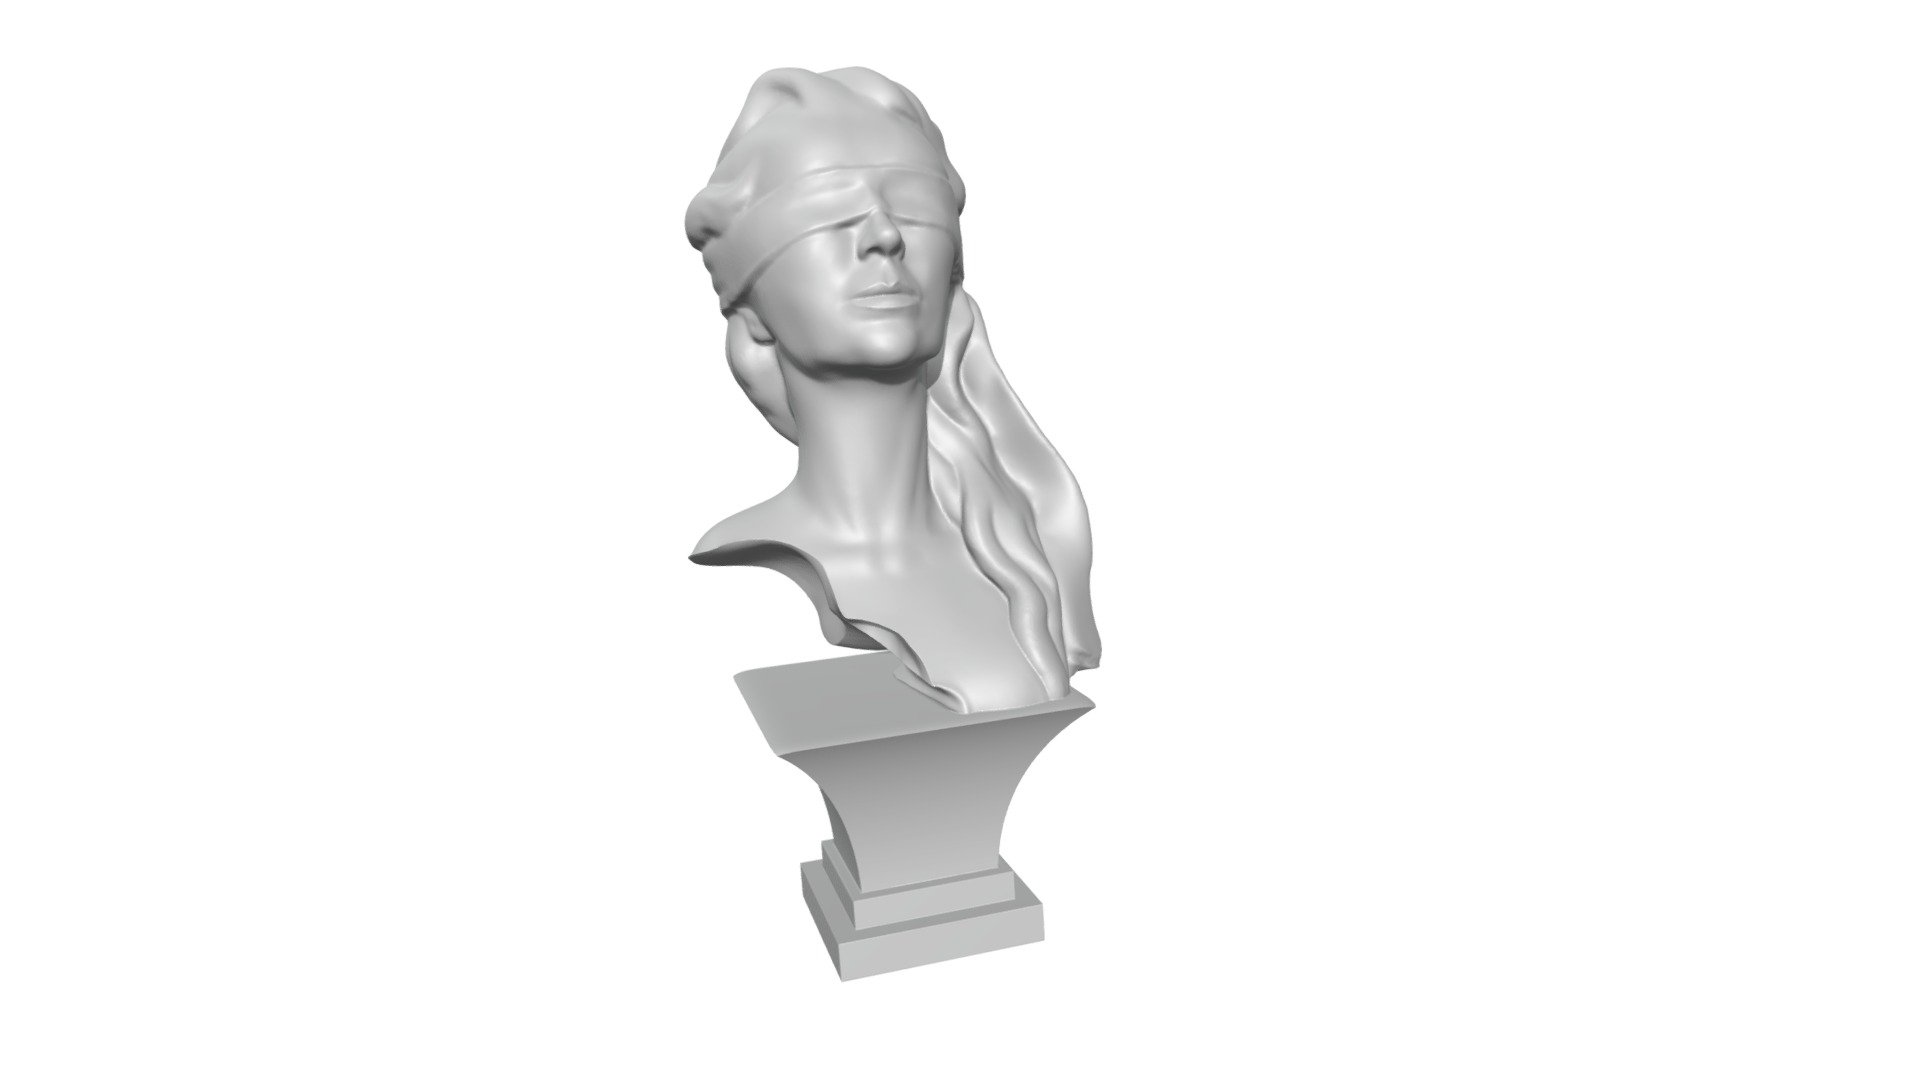 Lady goddess luck - blindfolded.

STL Model for 3D Printing.

Contact me for any question.

Came to see my other work.

If you get this model, I encourage you to give me feedback, just send me a message on instagram, I’d very happy to help or hear your feedback and pictures :)

For other custom products, please contact me, I would be glad to help you, I accept non or exclusive commissions.

If you like my art, please support me by purchasing my models, or following me on social media:

Instagram: https://www.instagram.com/animaartistspieces/

TikTok: https://www.tiktok.com/@animaartistspieces?lang=it

Facebook: https://www.facebook.com/profile.php?id=100087530776989

WEBSITE: https://www.animacampania.it/site/

Linktree: https://linktr.ee/animaartistspieces - Lady goddess luck - blindfolded 3d model